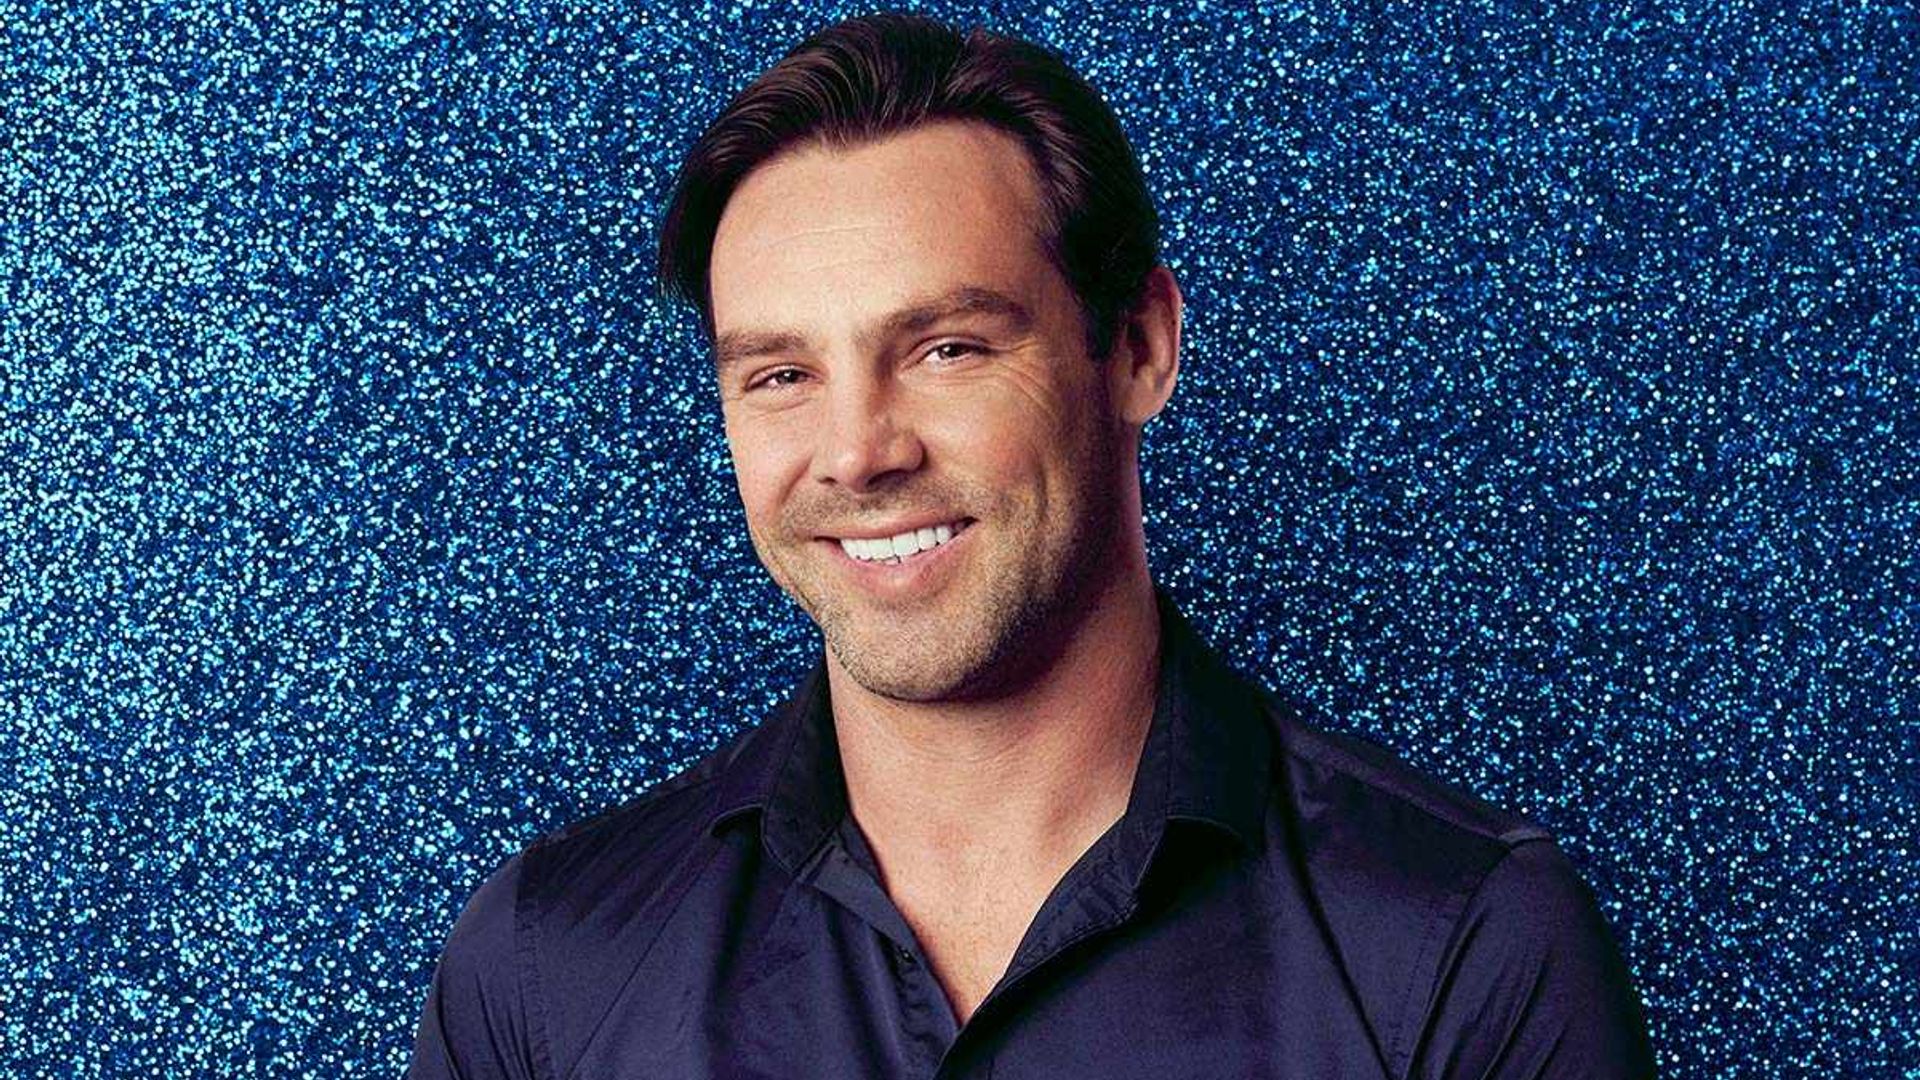 Ben Foden worries children will be in tears while watching Dancing on Ice following X Factor experience